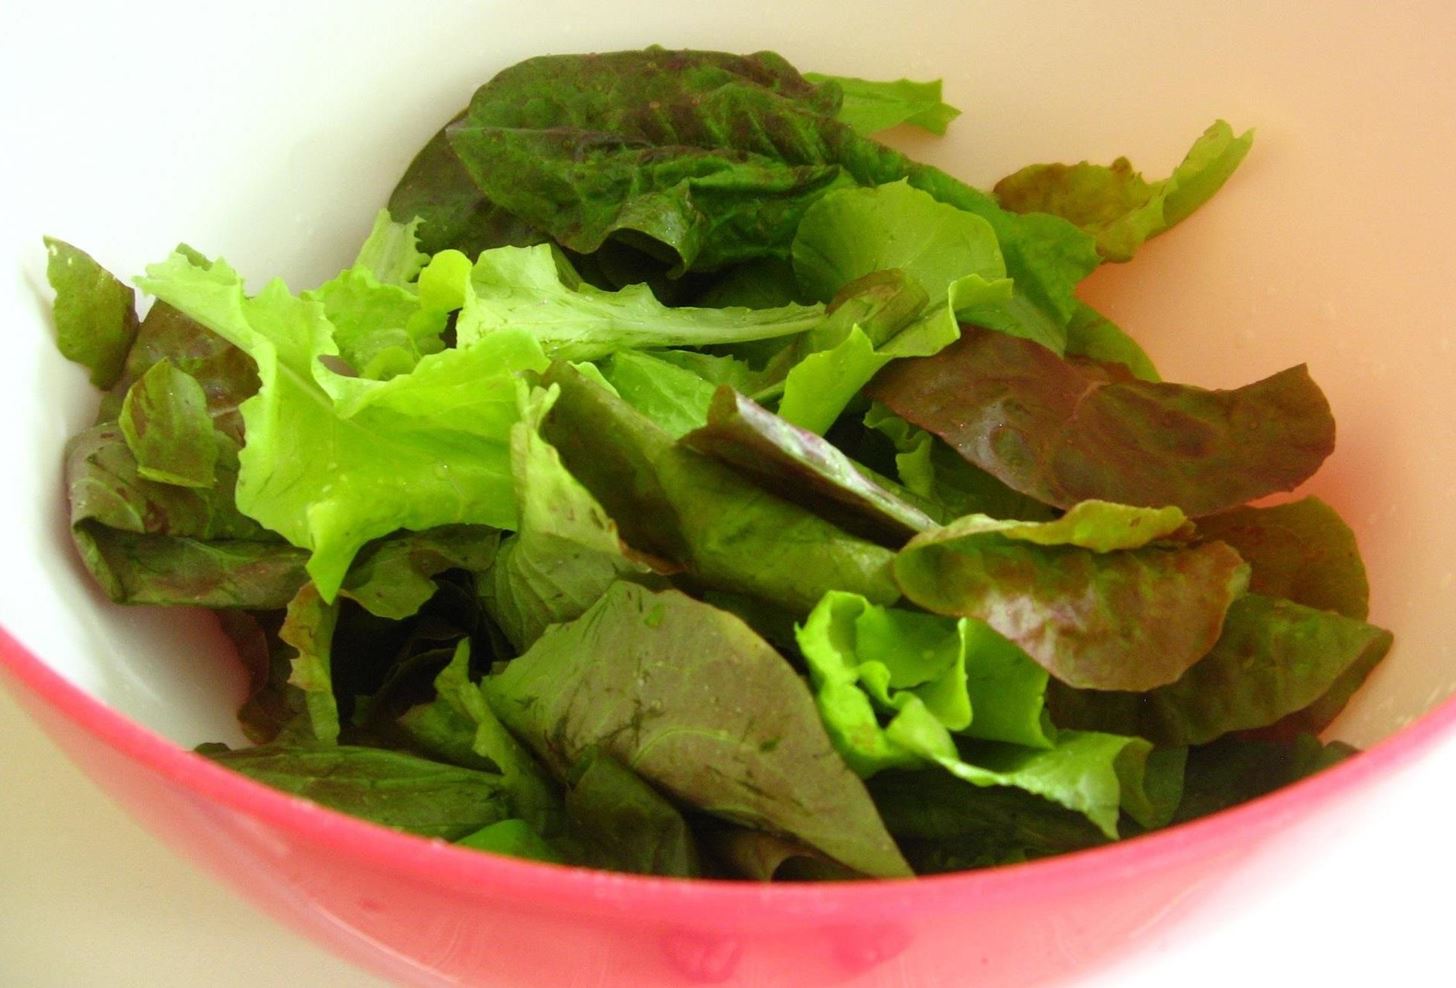 How to Use Up Lettuce & Other Greens Before They Go Bad (Without Making Any Salads)